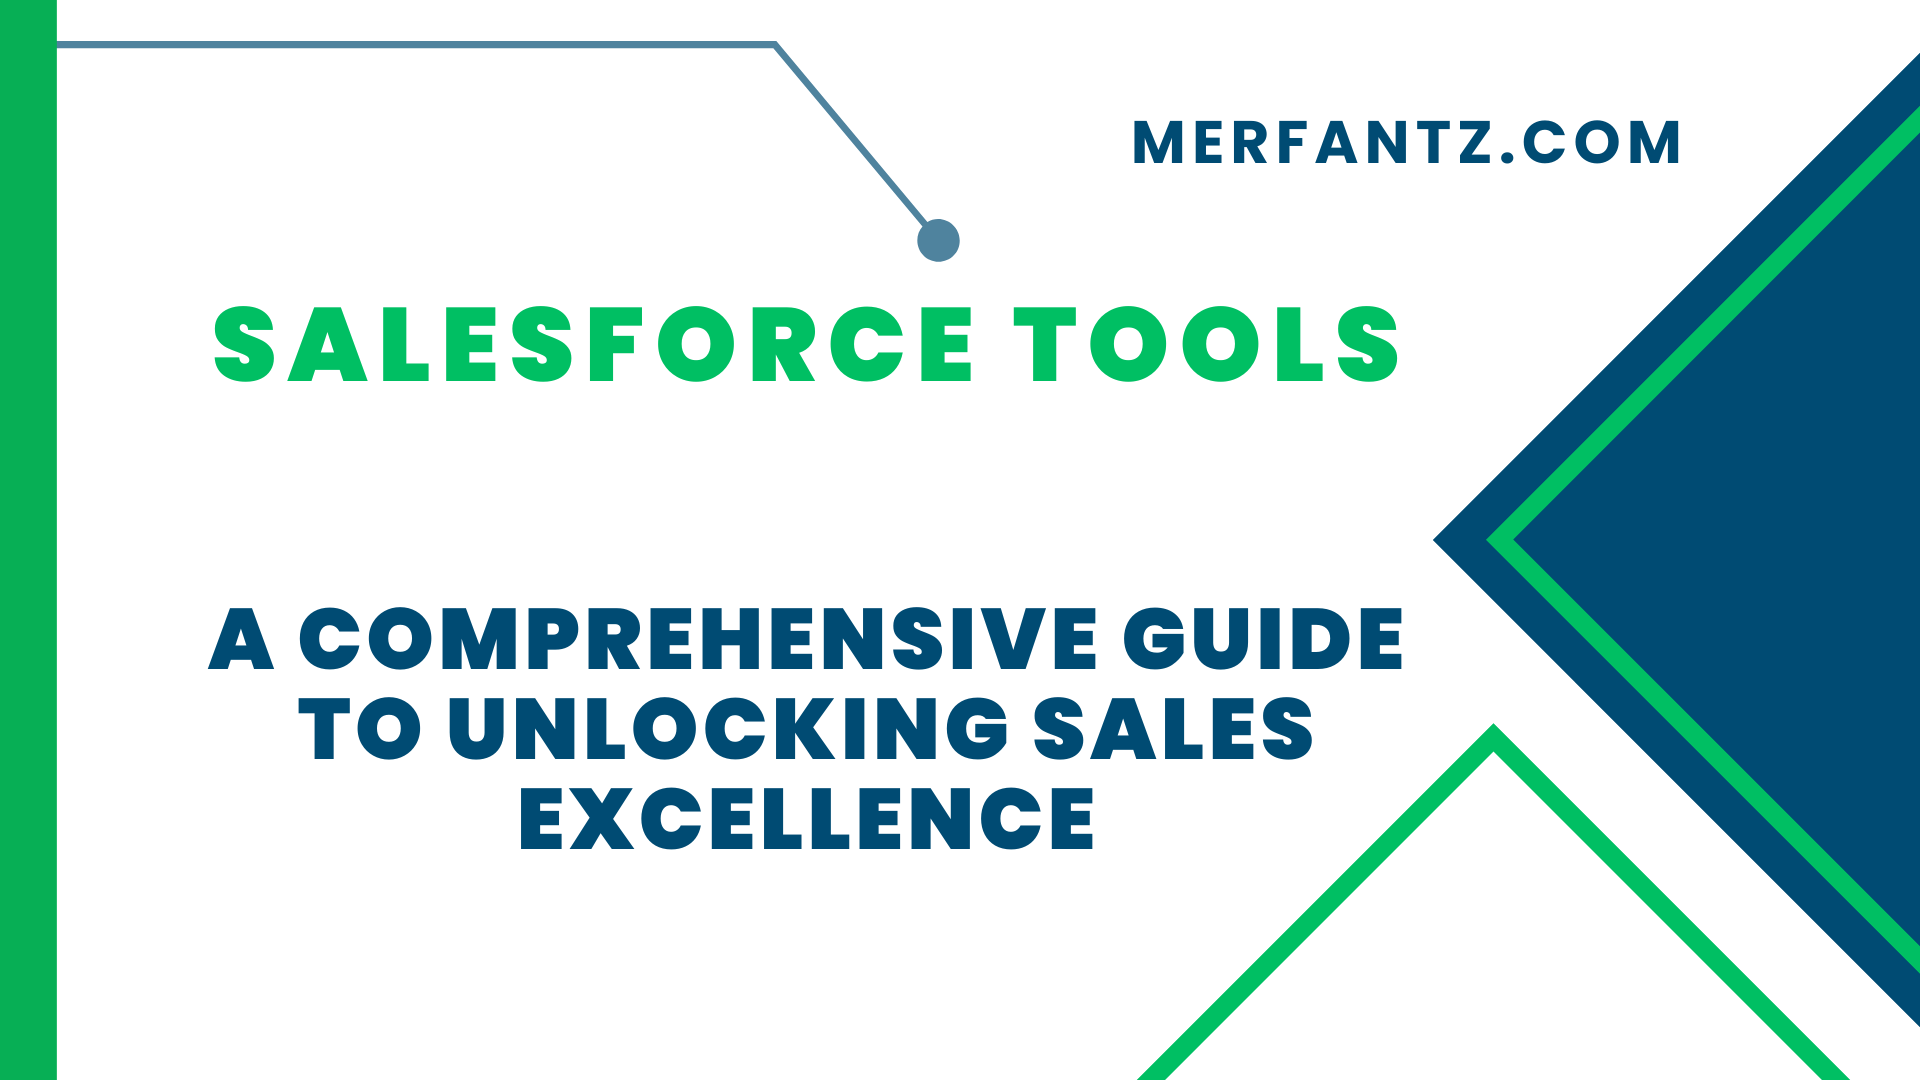 A Comprehensive Guide to Unlocking Sales Excellence